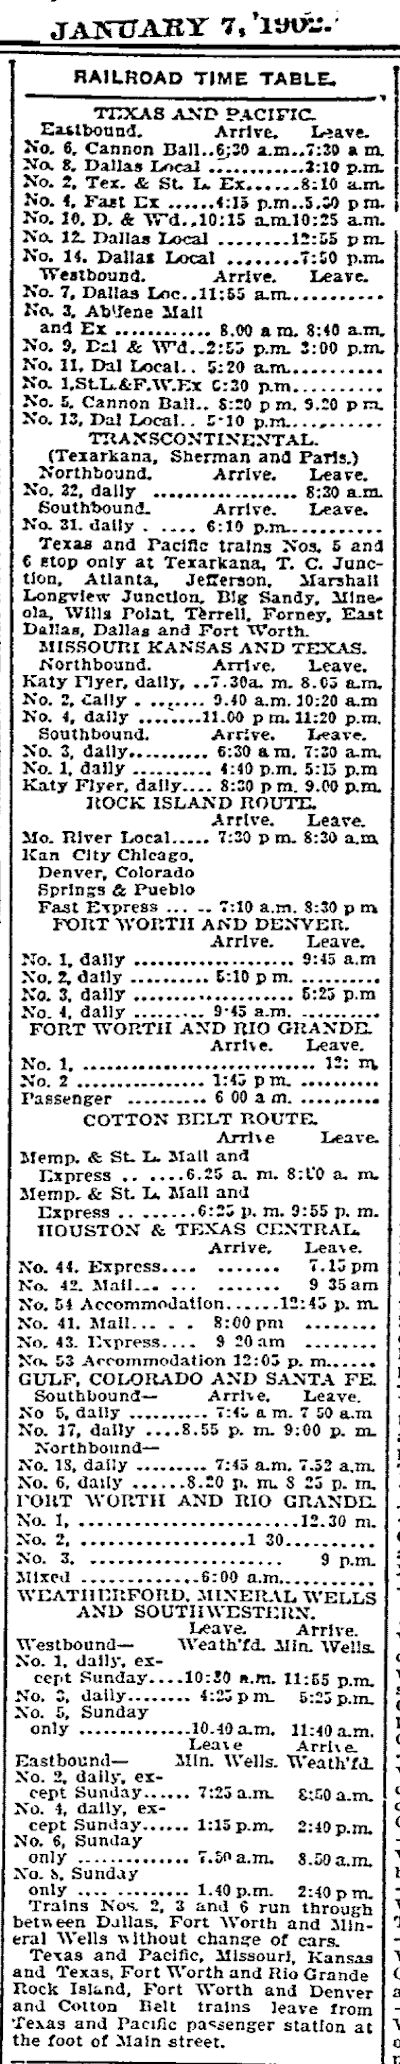 time table 1902